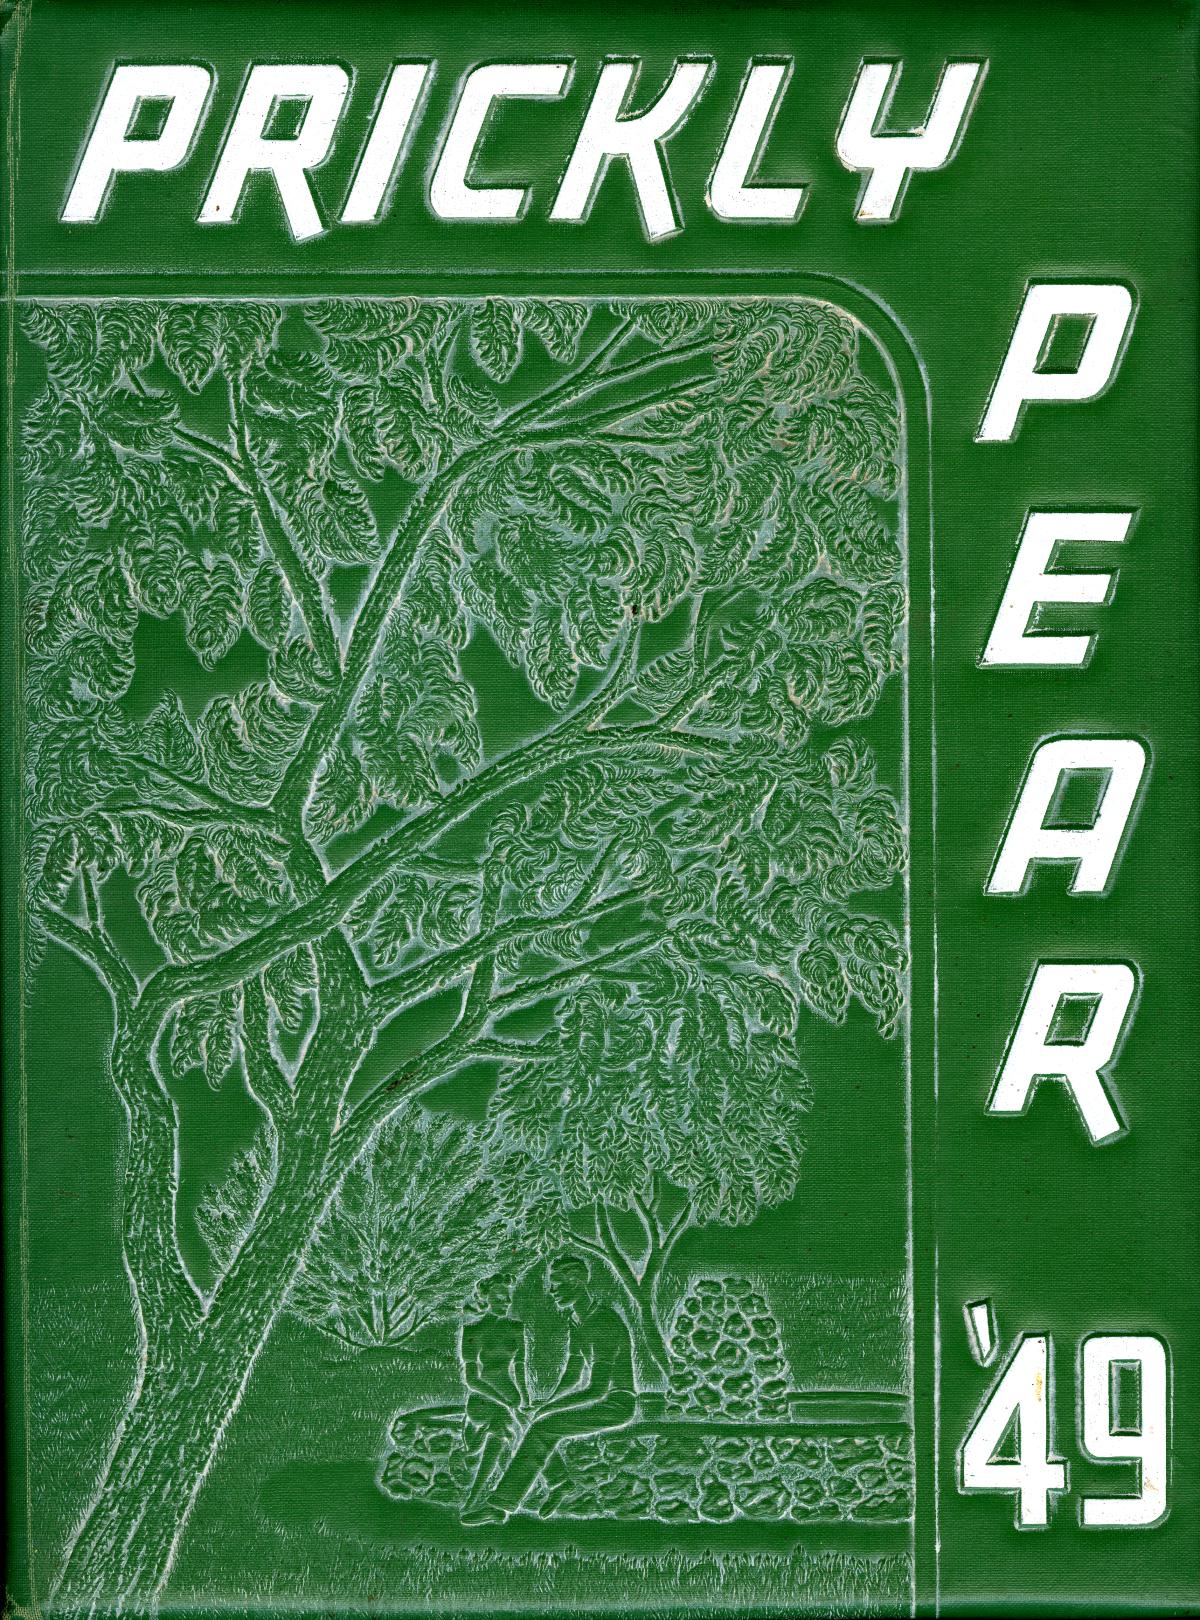 Prickly Pear, Yearbook of Abilene Christian College, 1949
                                                
                                                    Front Cover
                                                